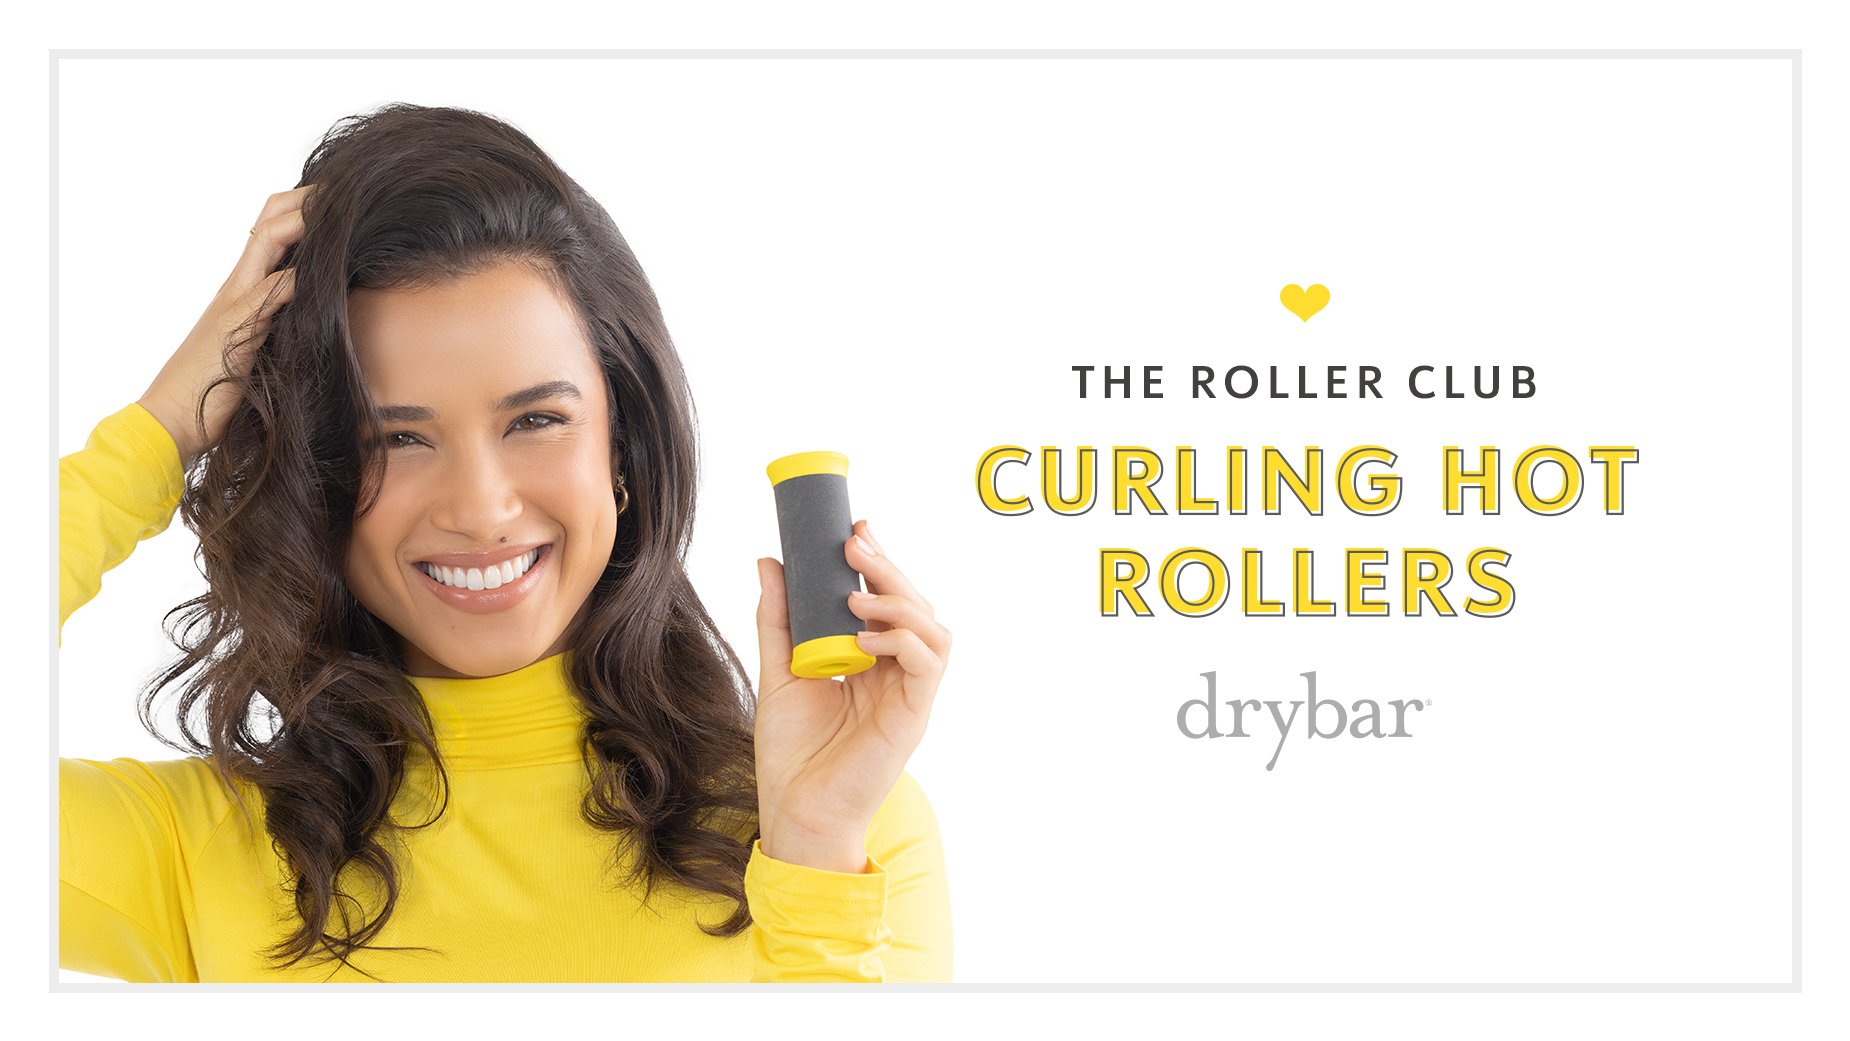 The Roller Club Curling Hot Rollers video